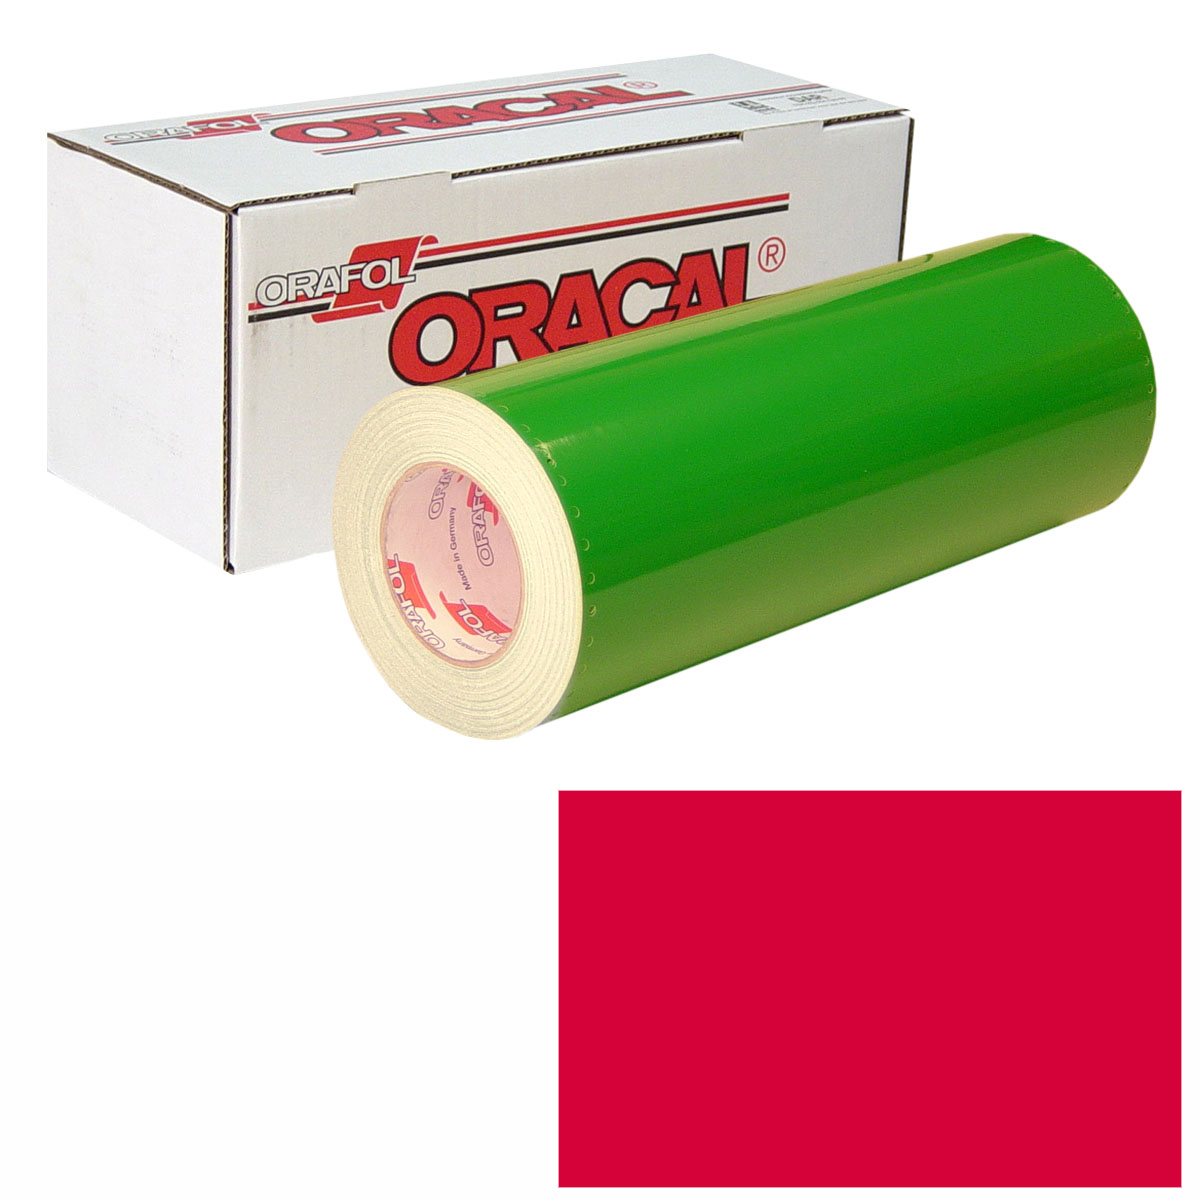 ORACAL 651 30in X 50yd 032 Light Red